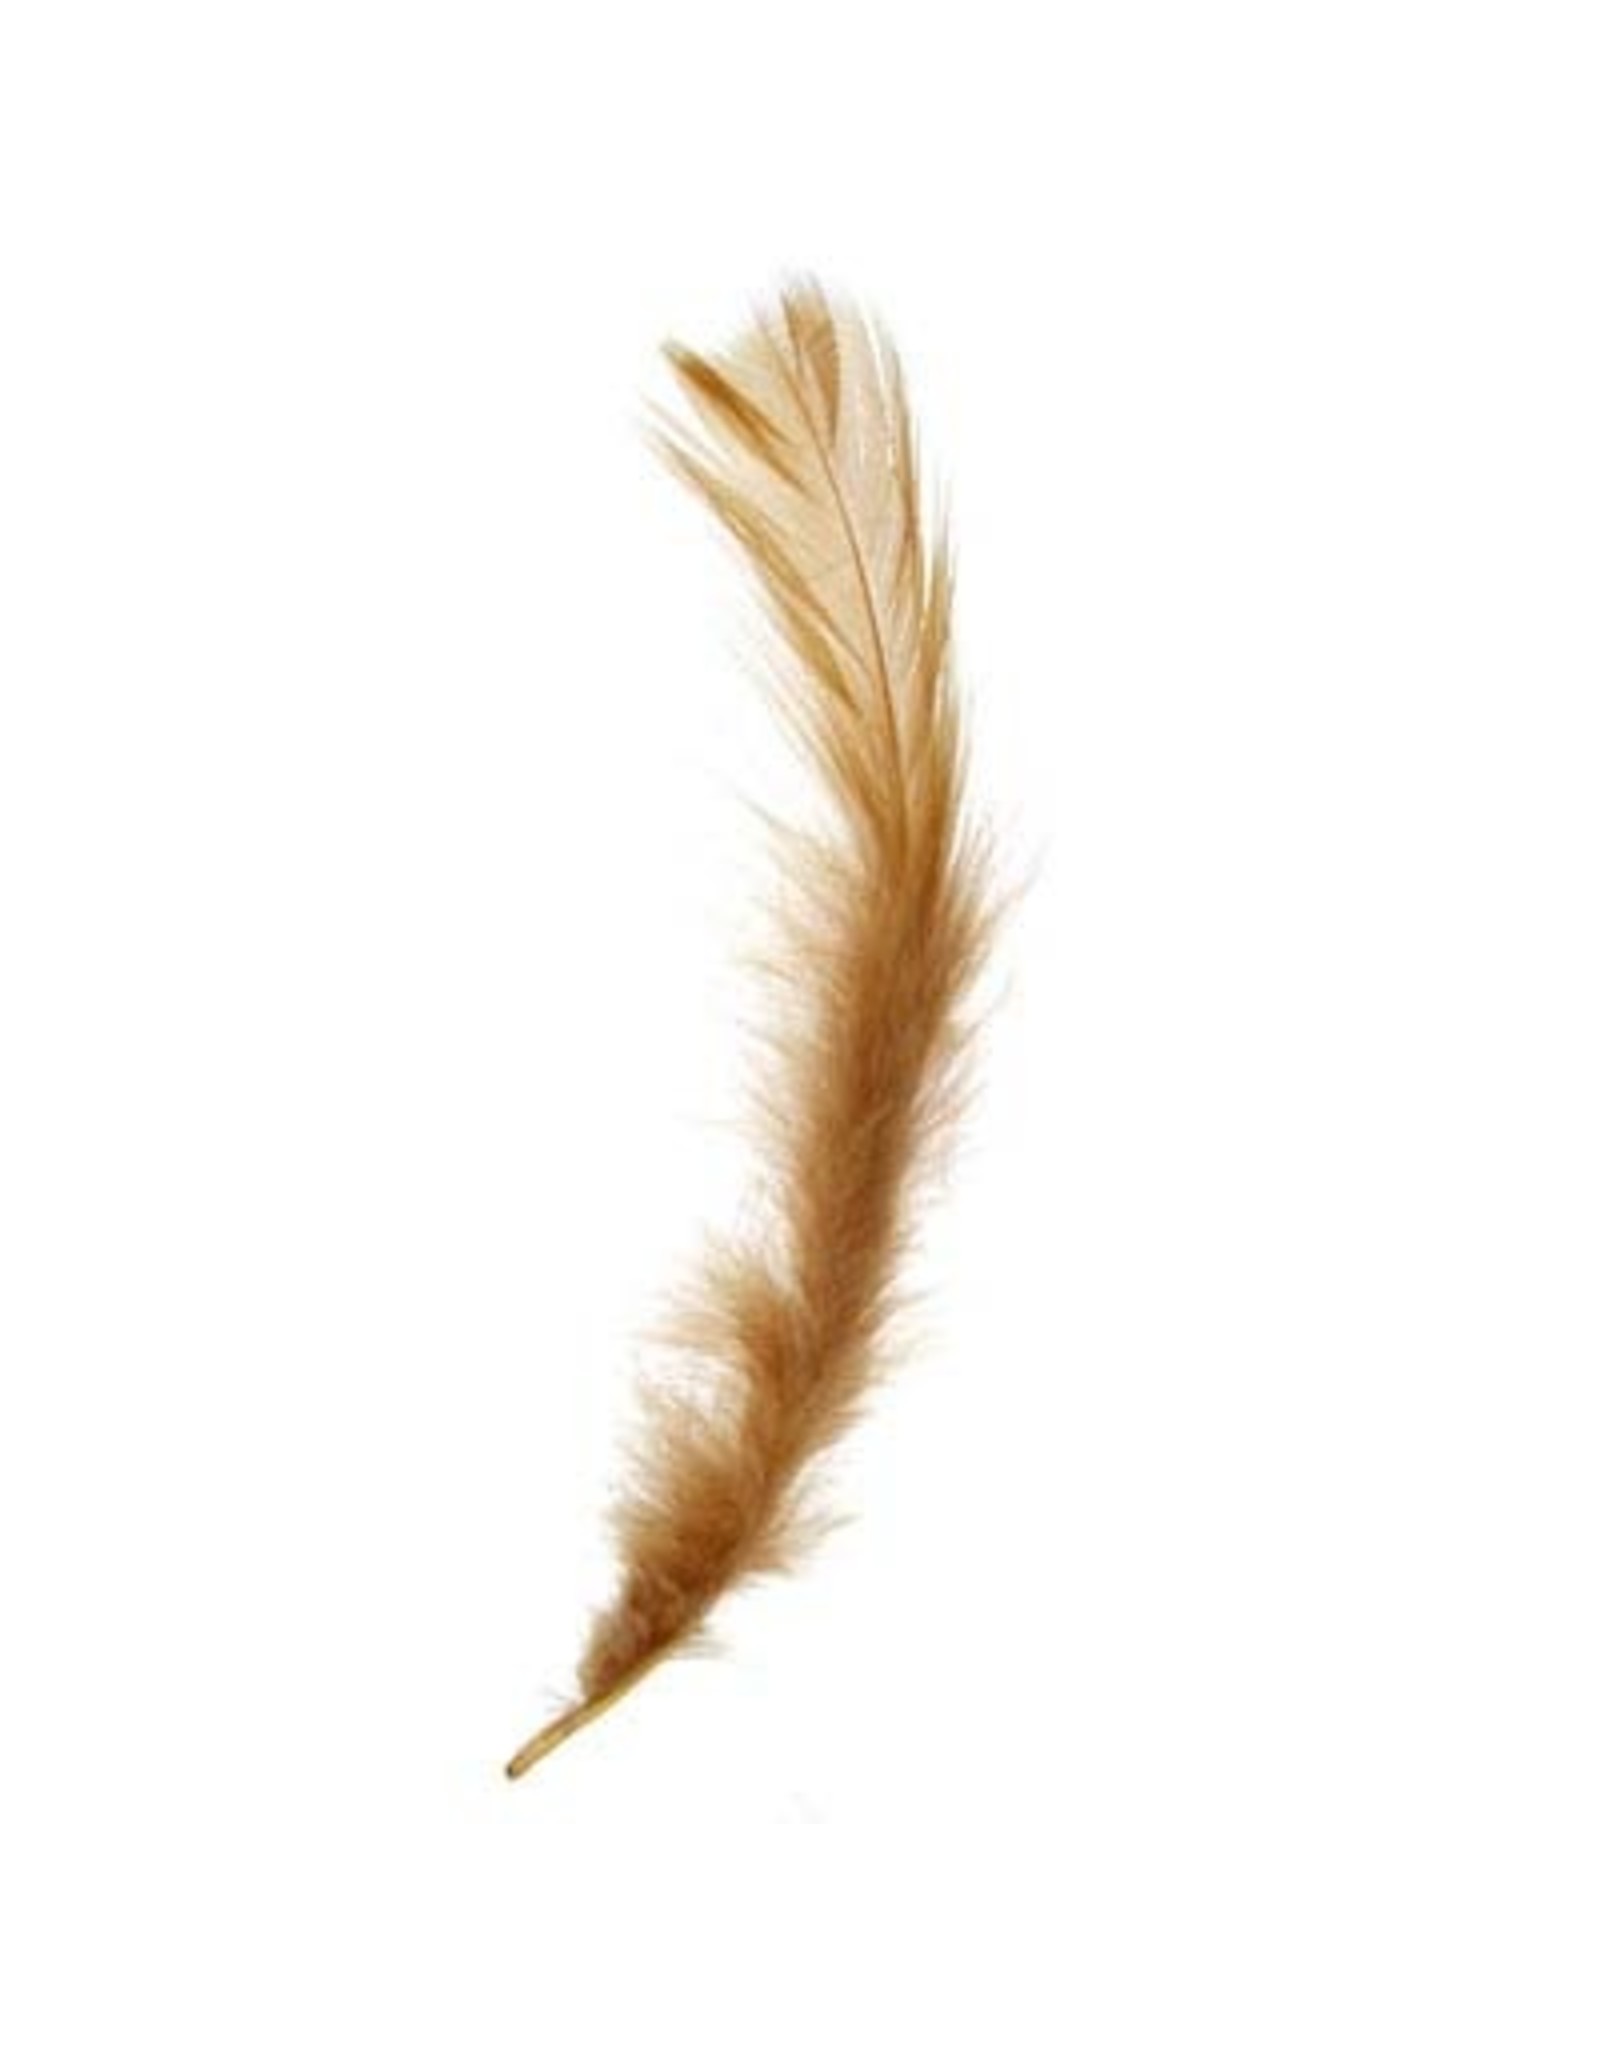 Marabou Feathers Brown 6g